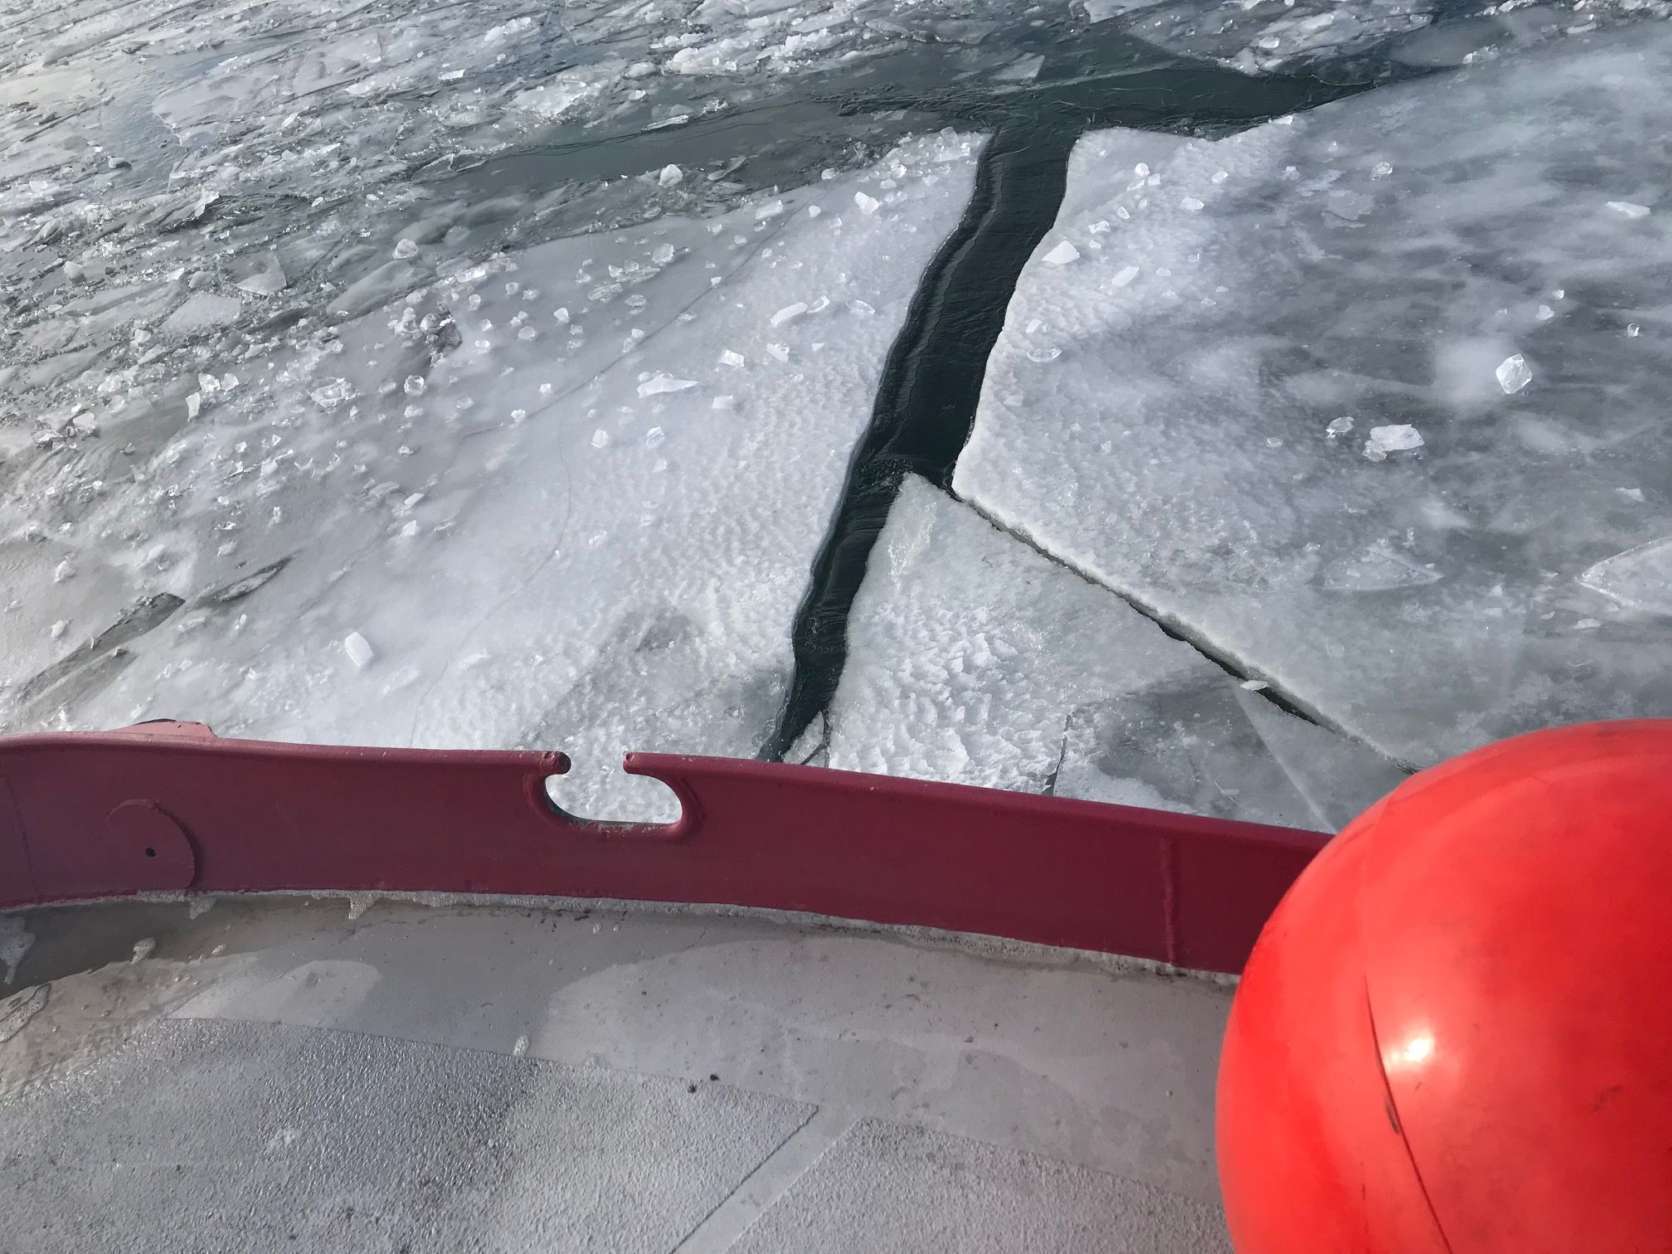 The thickness of the ice varies throughout the connected waterways depending on how many times the vessel has broken up the path and on the shade. (WTOP/Megan Cloherty)